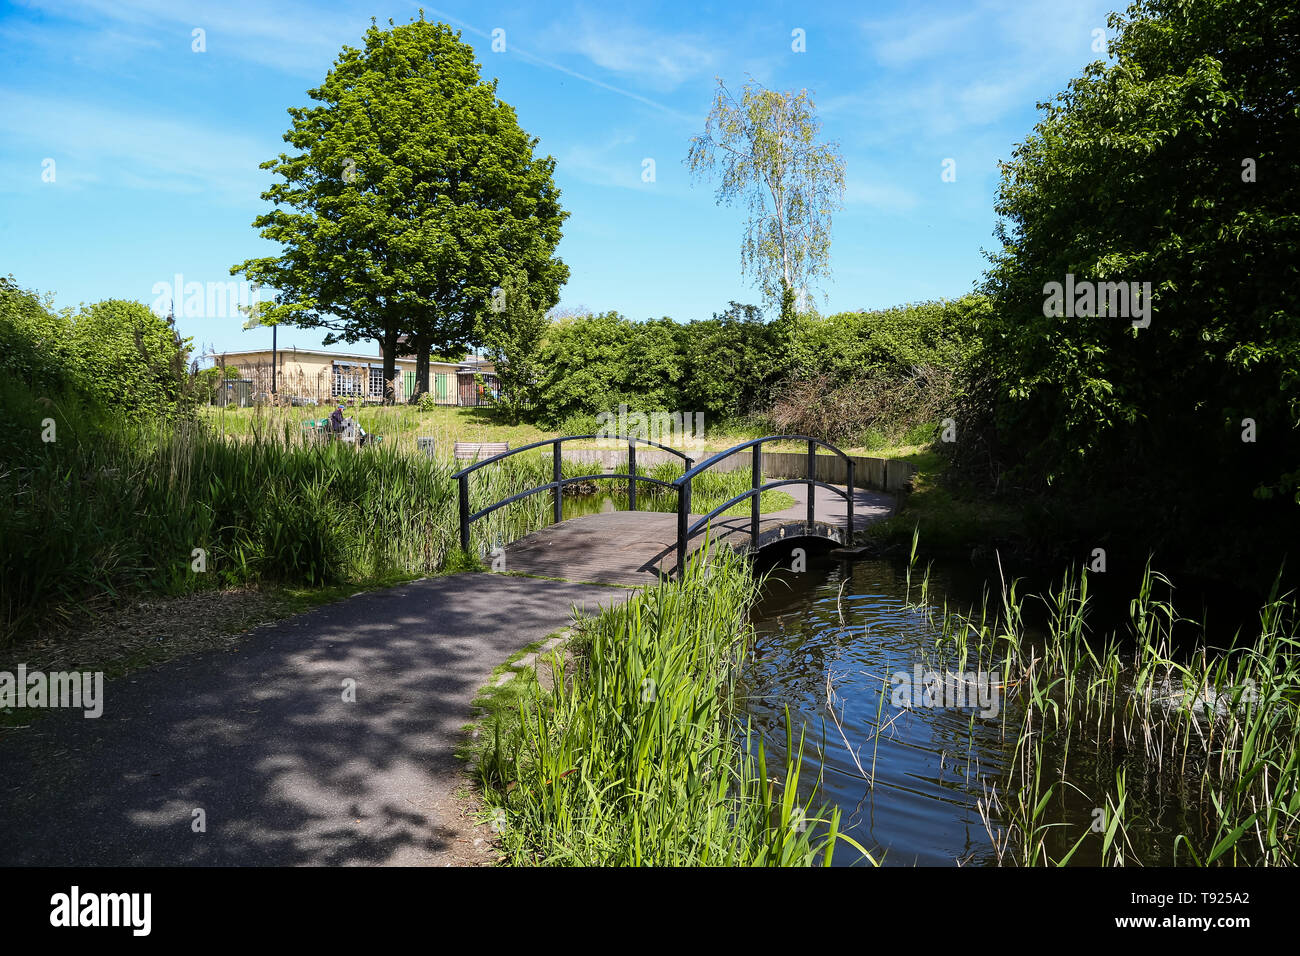 Gravesend, Kent, UK. Fort Gardens with a small bridge spanning a pond. Stock Photo